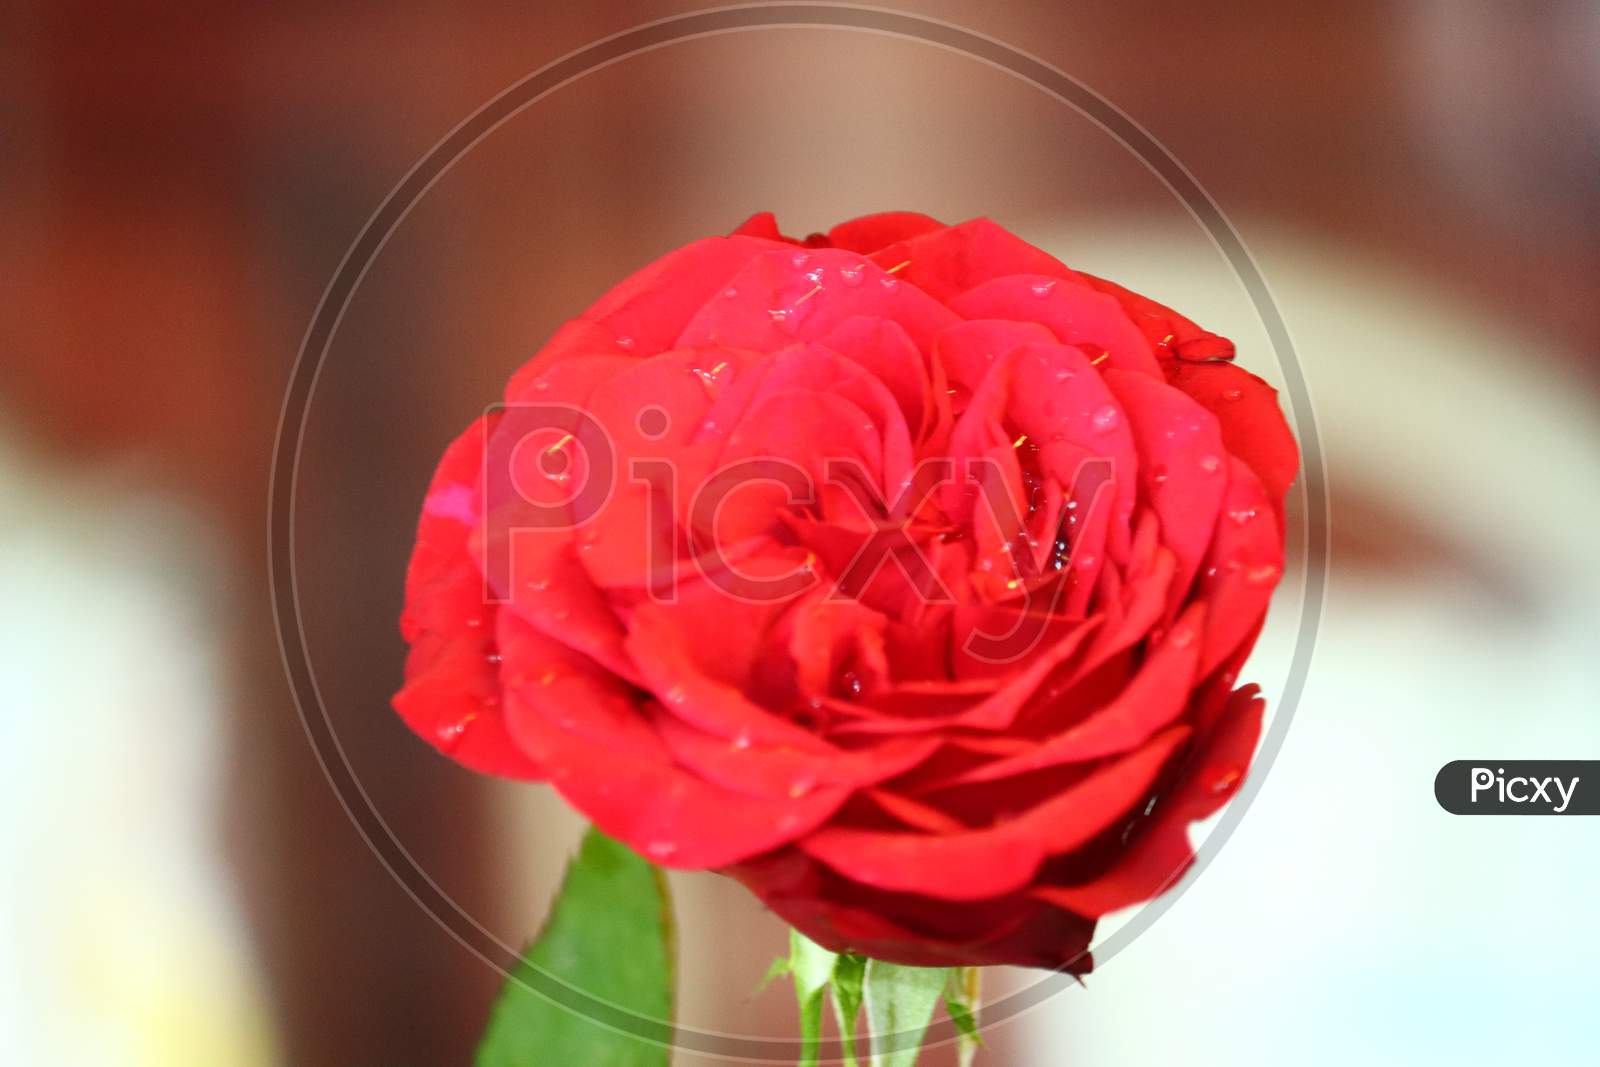 A Red Rose Flower